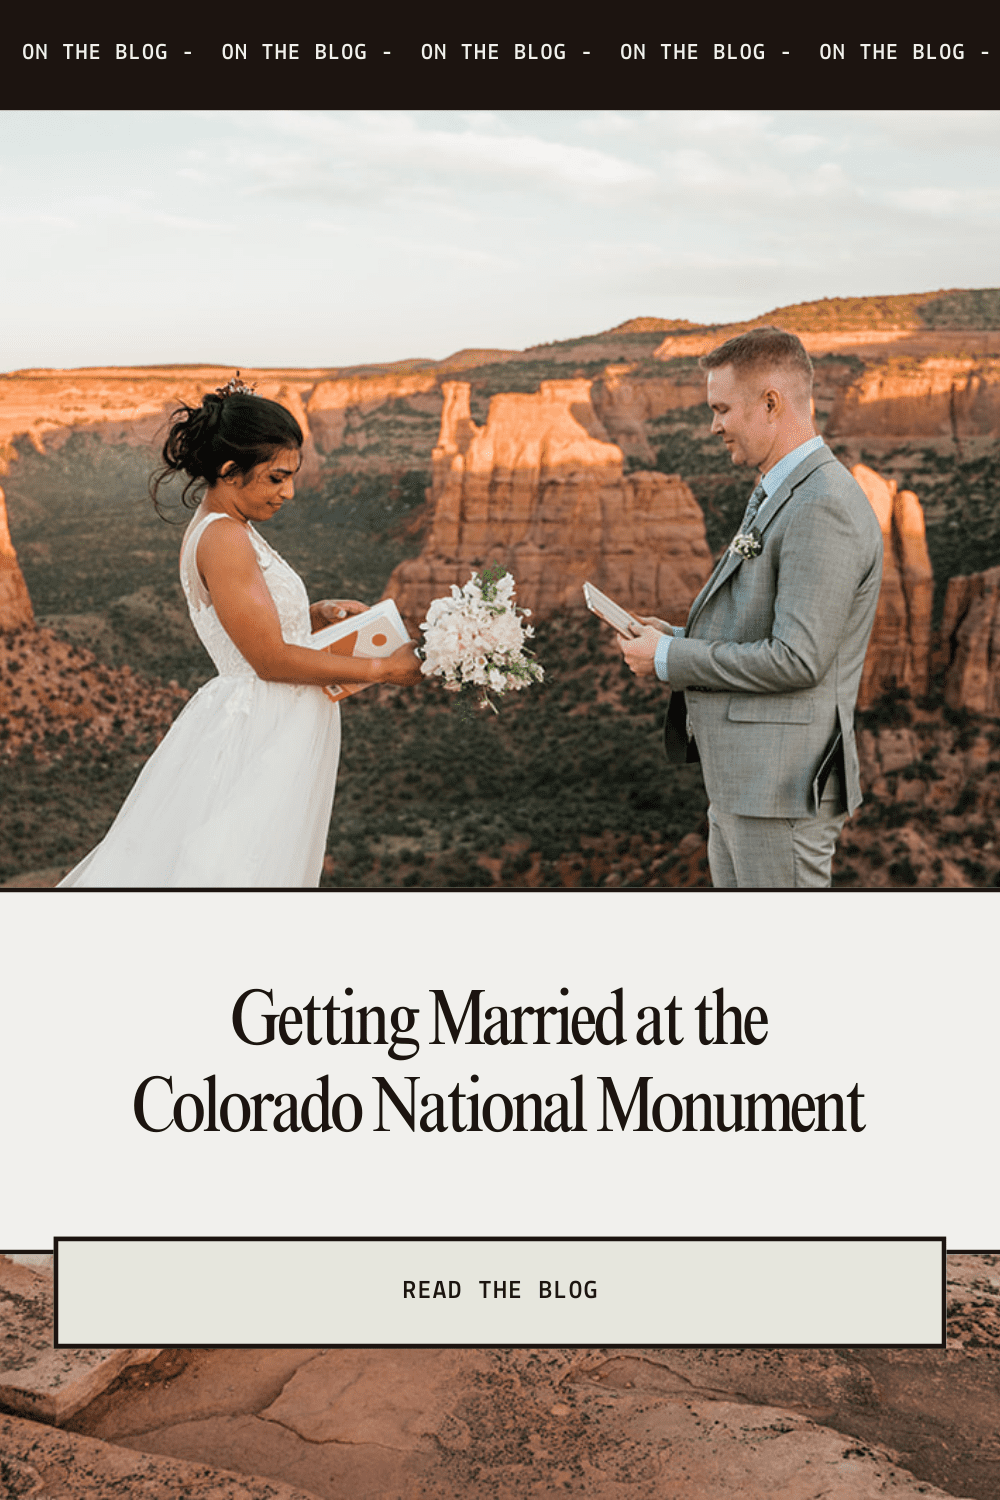 Getting Married at the Colorado National Monument